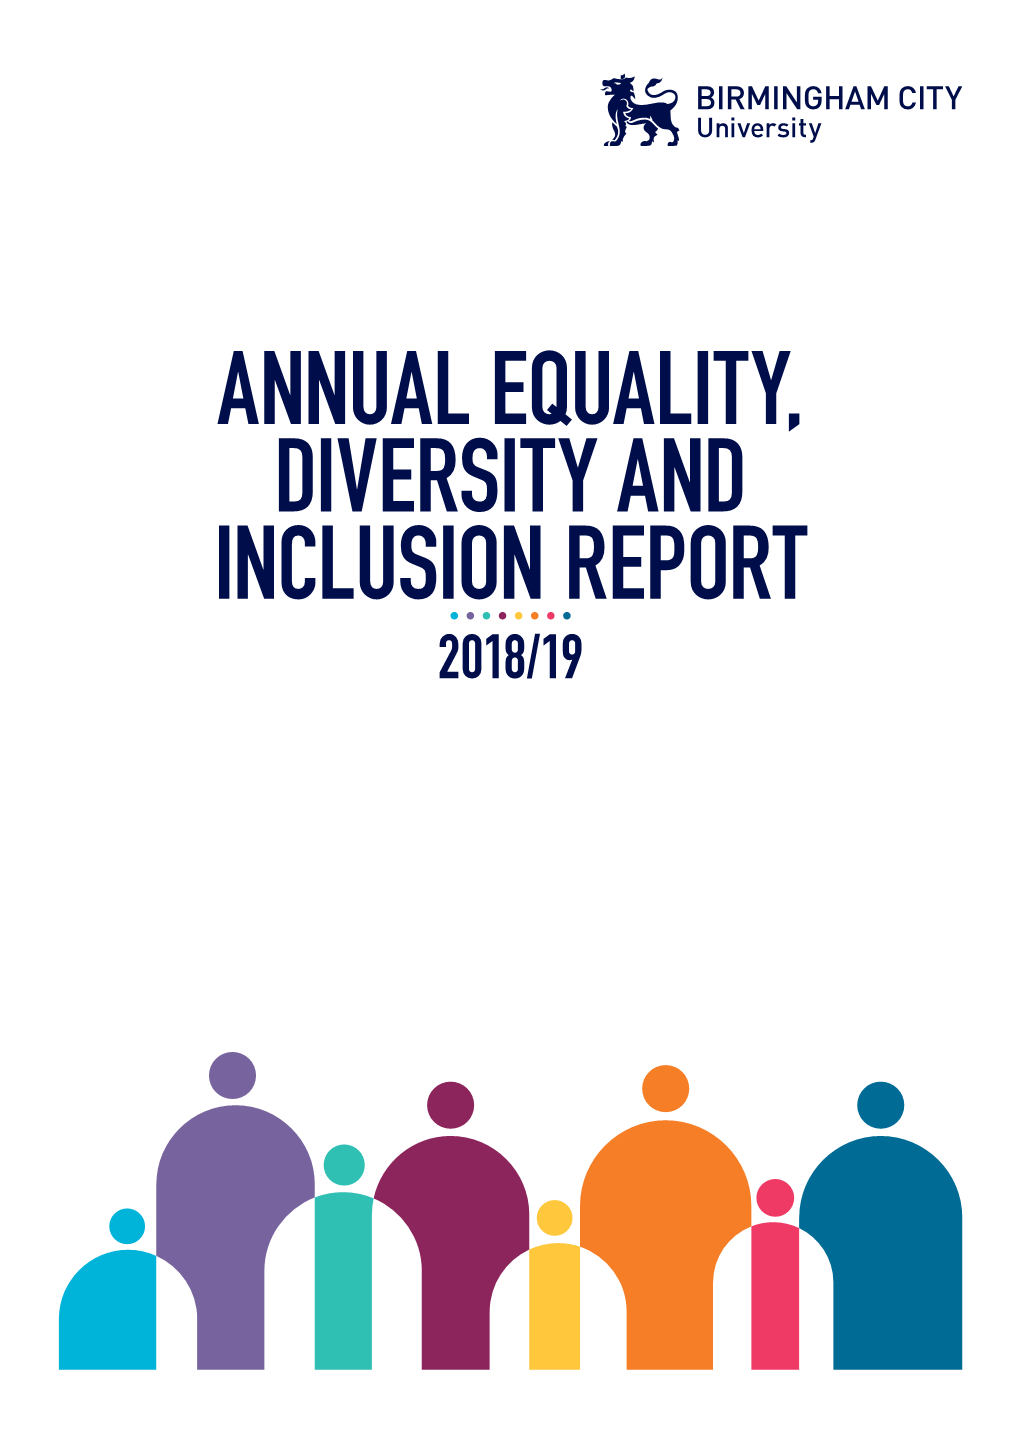 Annual Equality, Diversity and Inclusion Report 2018/19 Contents